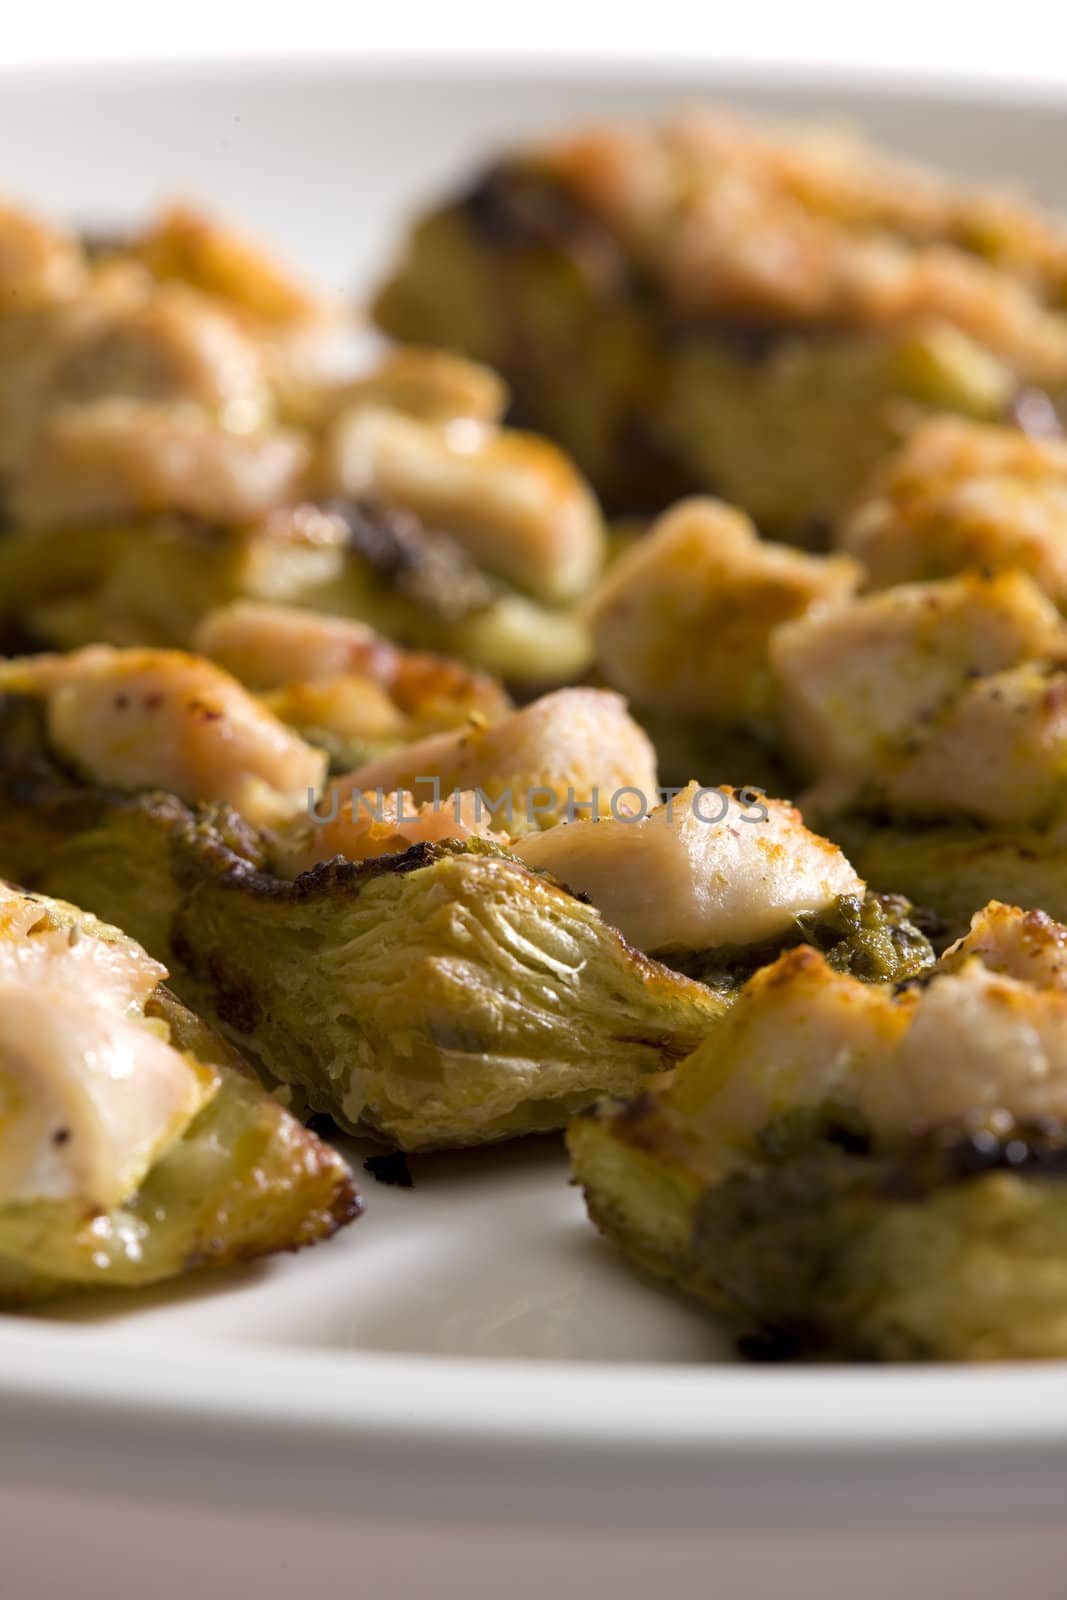 baked chicken meat with pesto on puff by phbcz